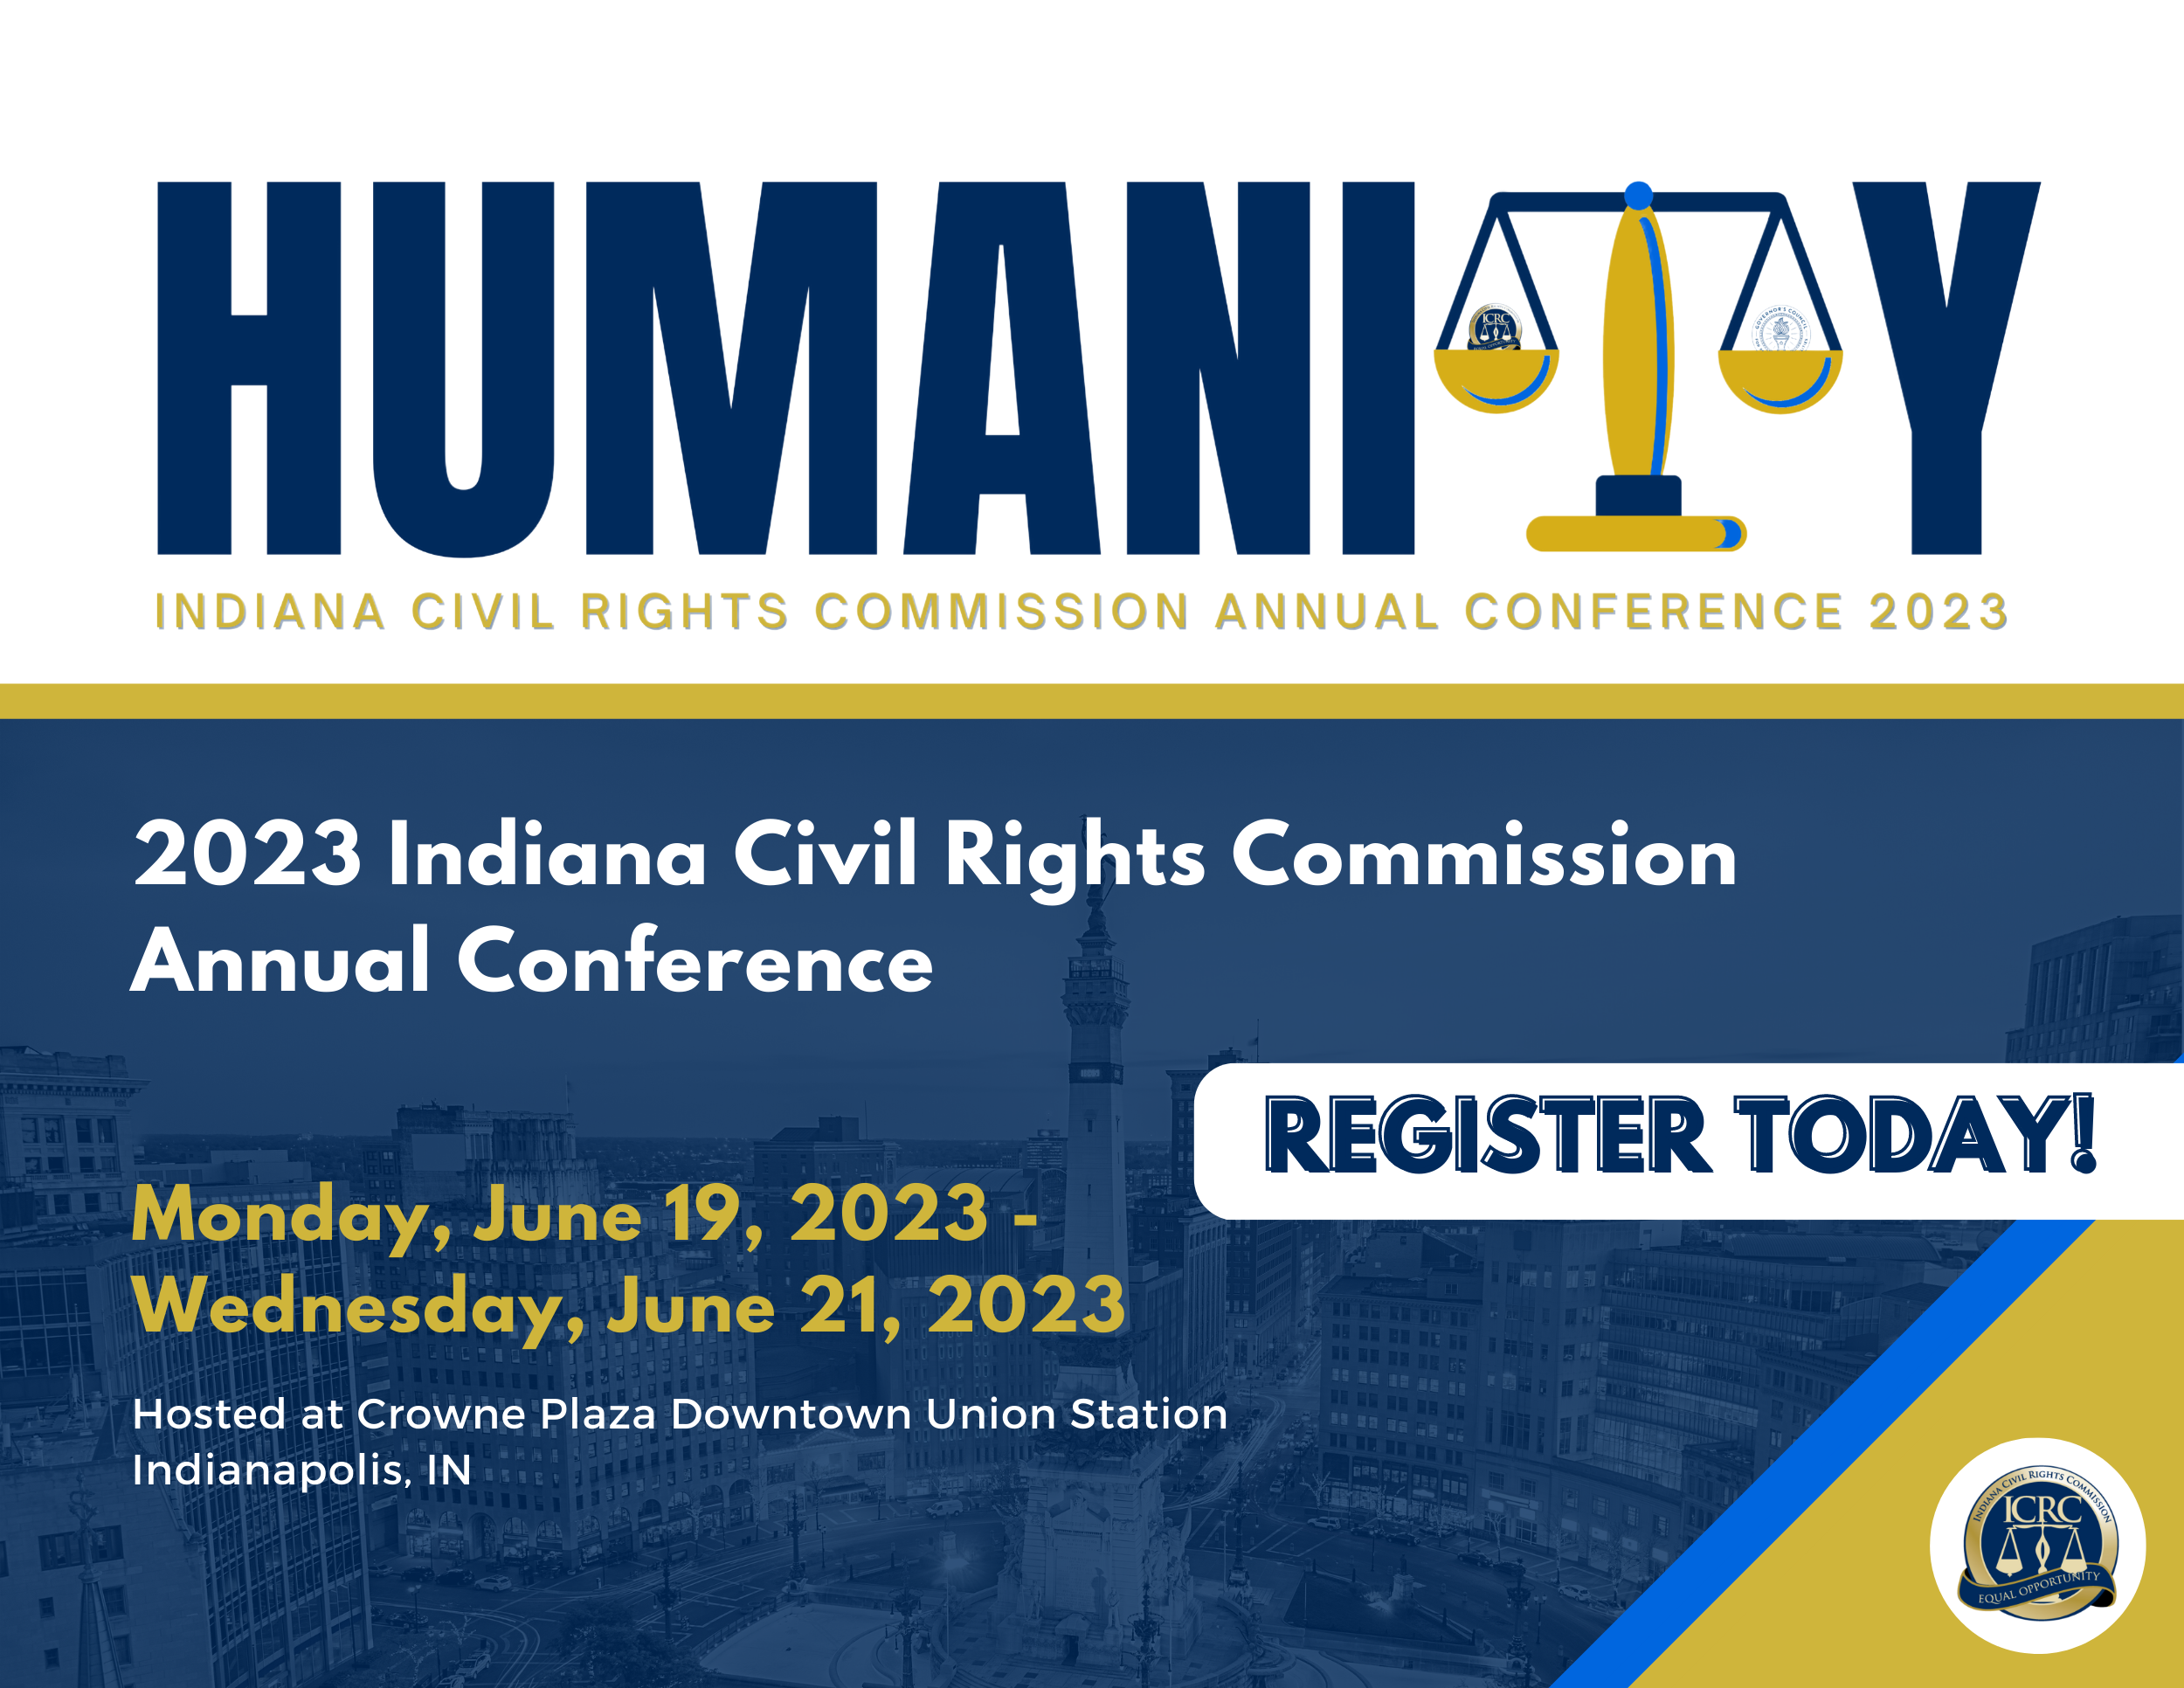 Register for the 2023 Indiana Civil Rights Commission Annual Conference today!